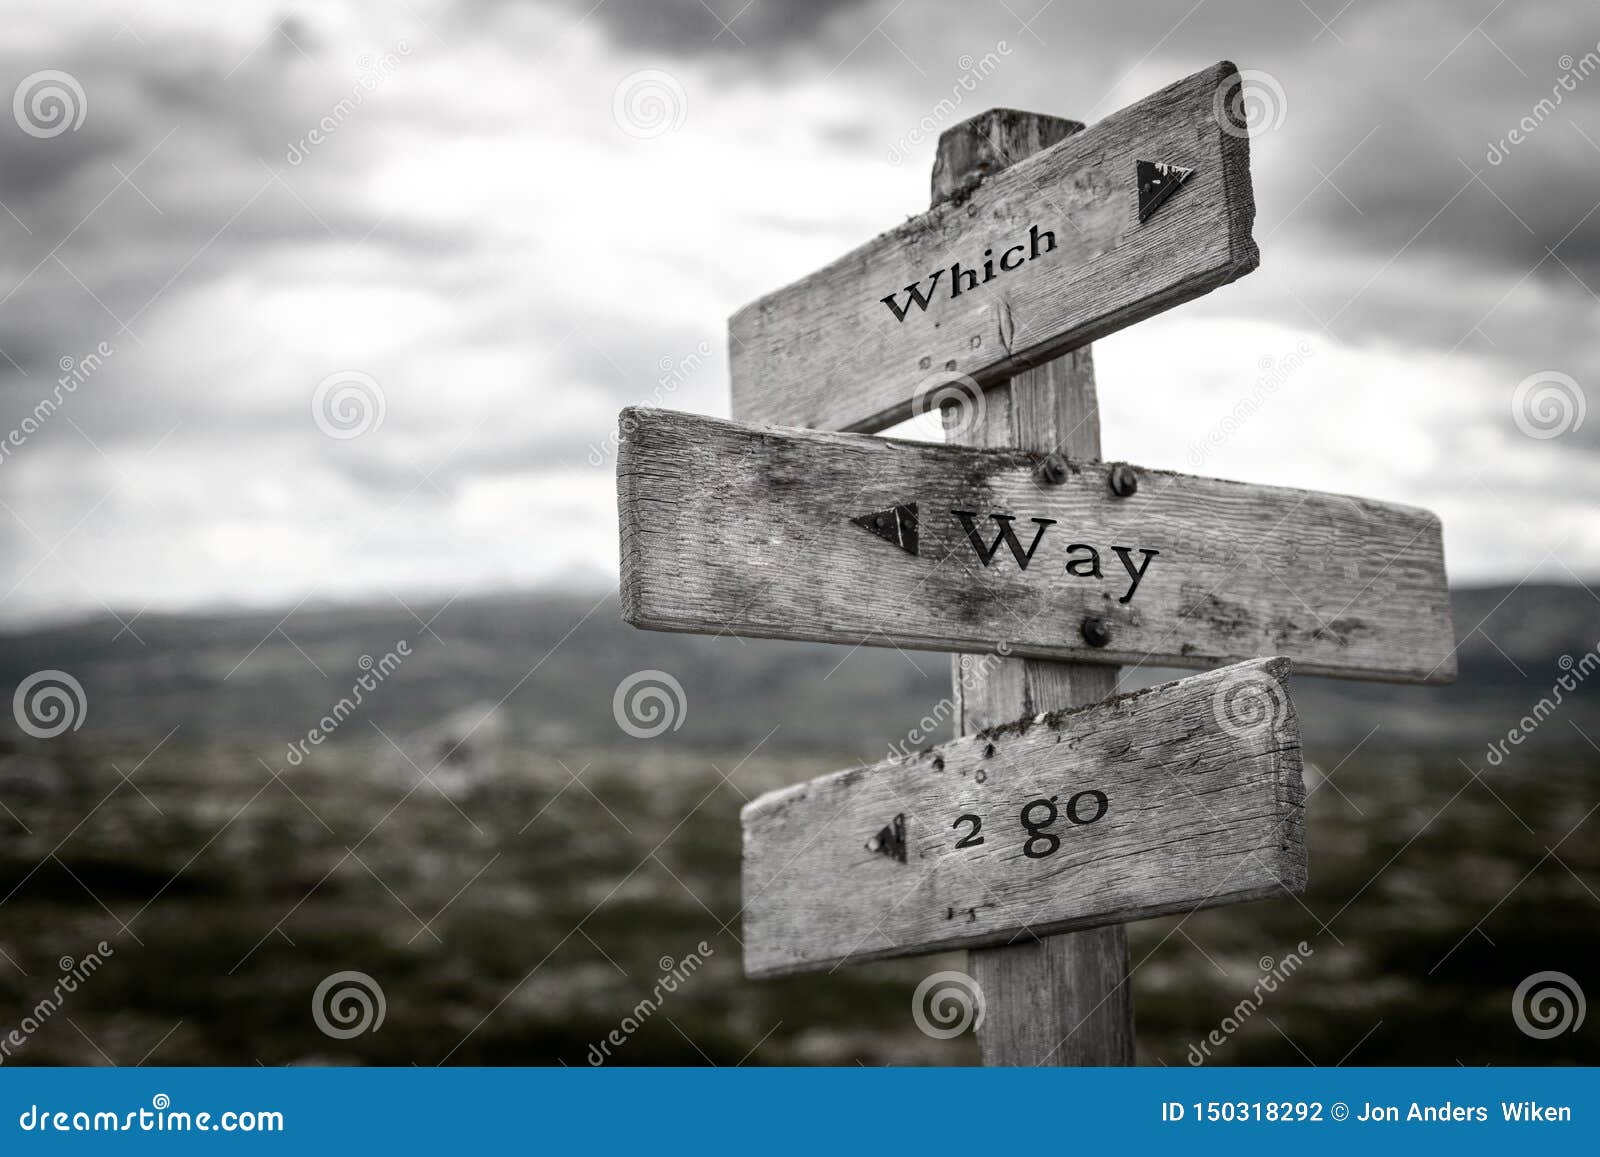 which way to go wooden signpost outdoors in nature.